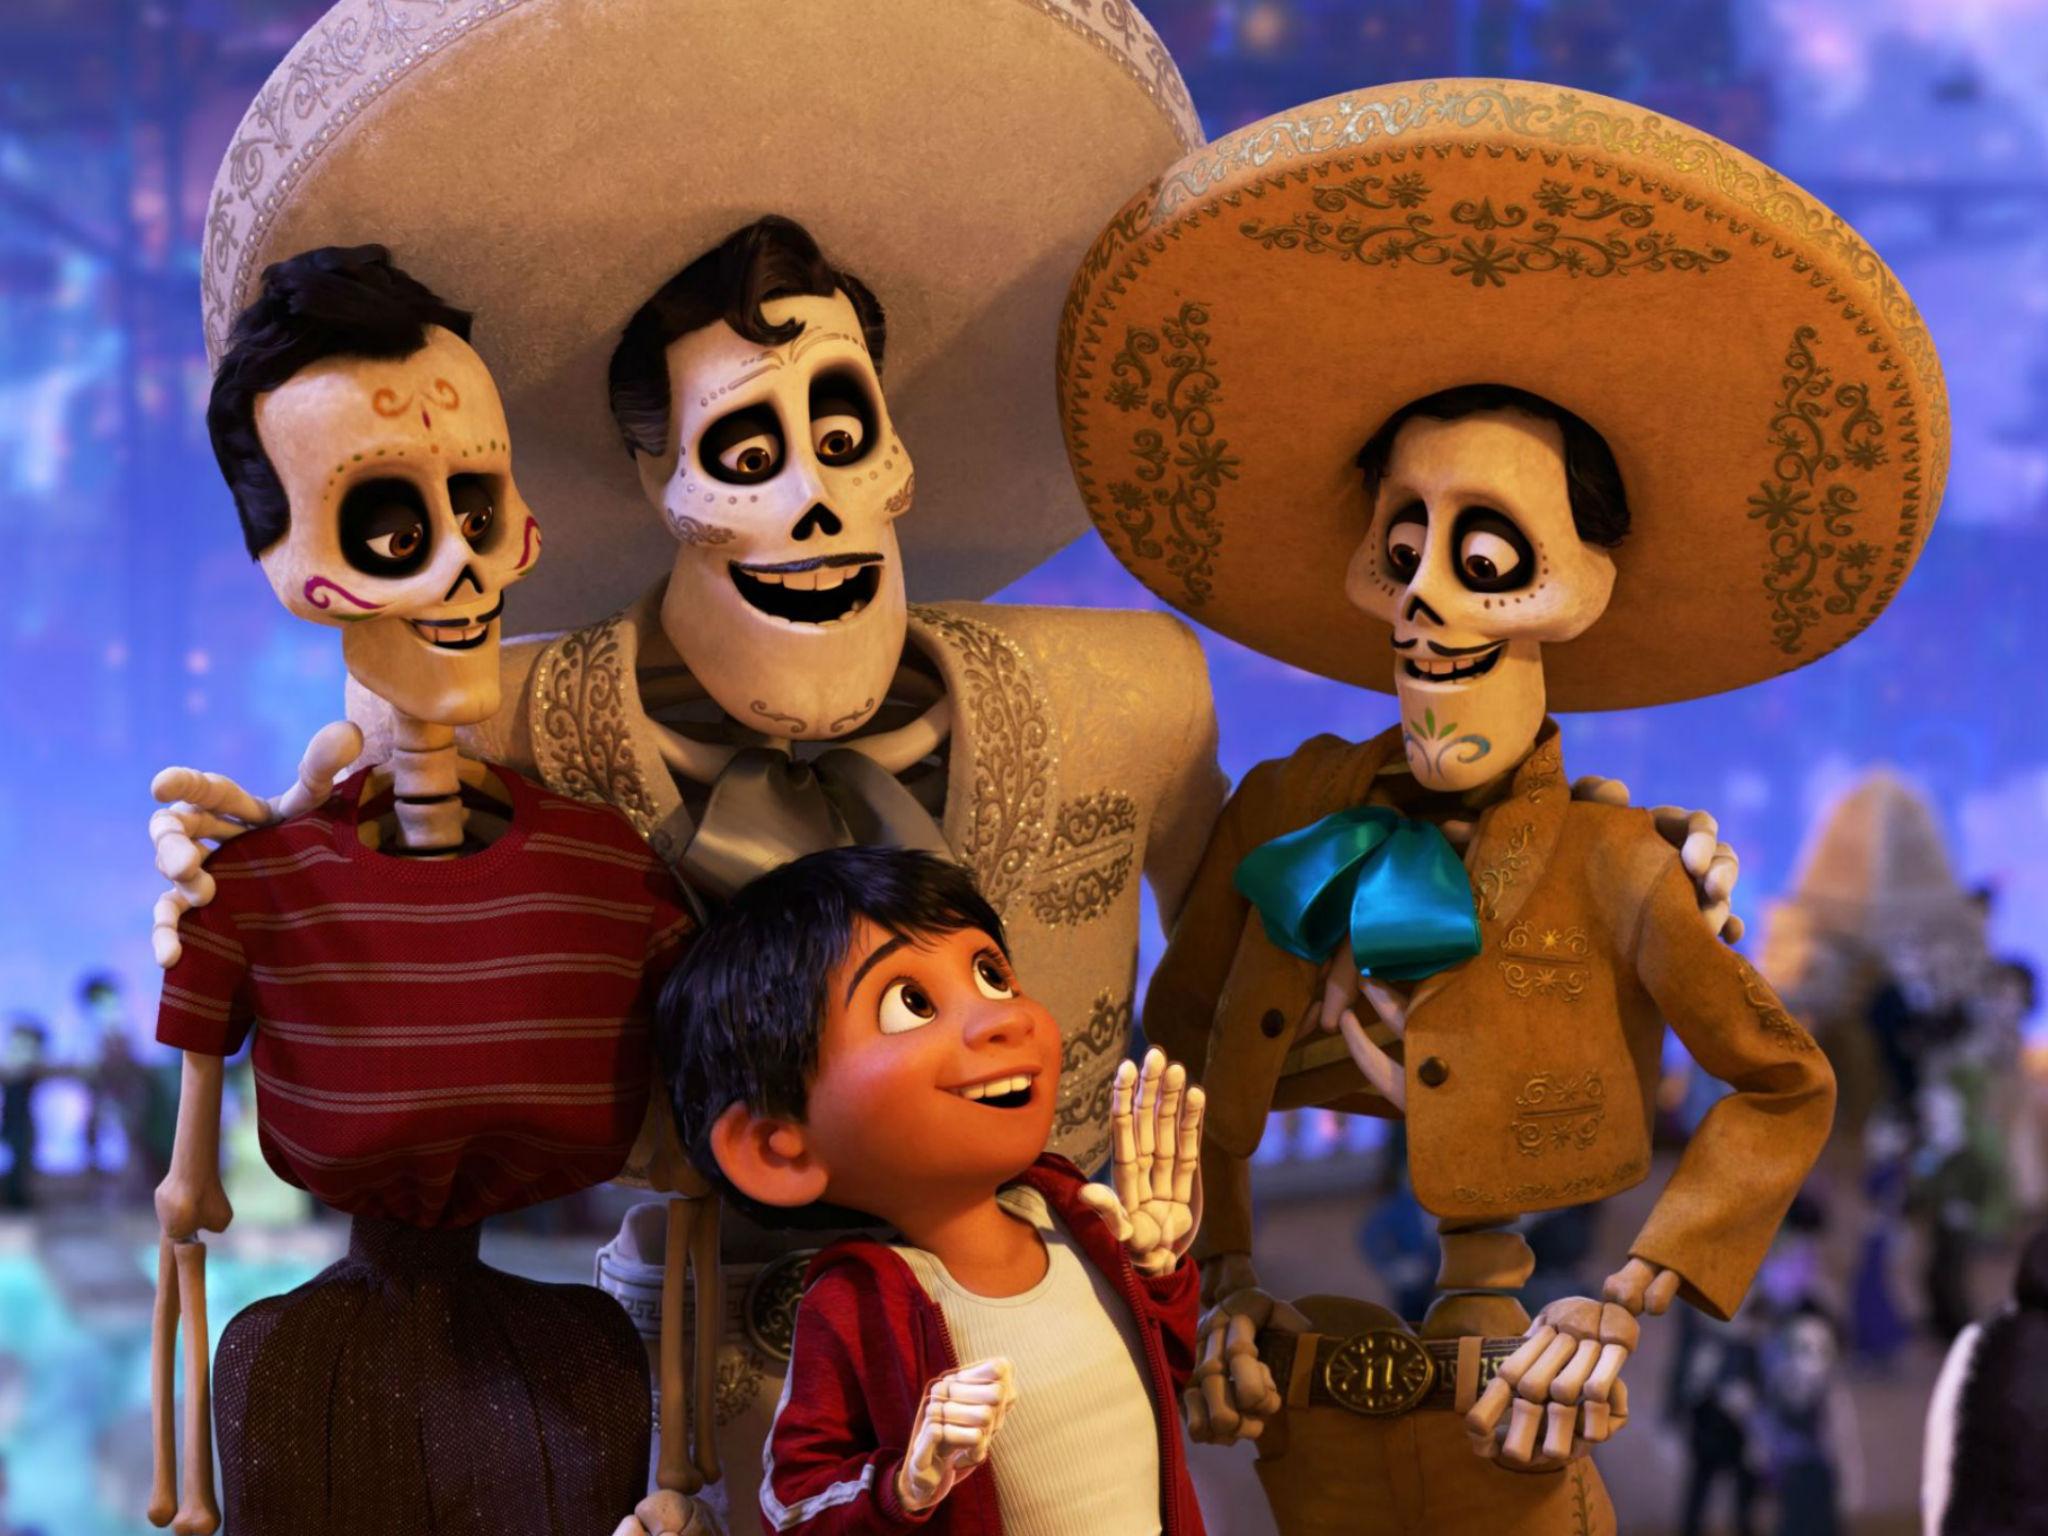 Coco movie review: Another animated feature about finding yourself